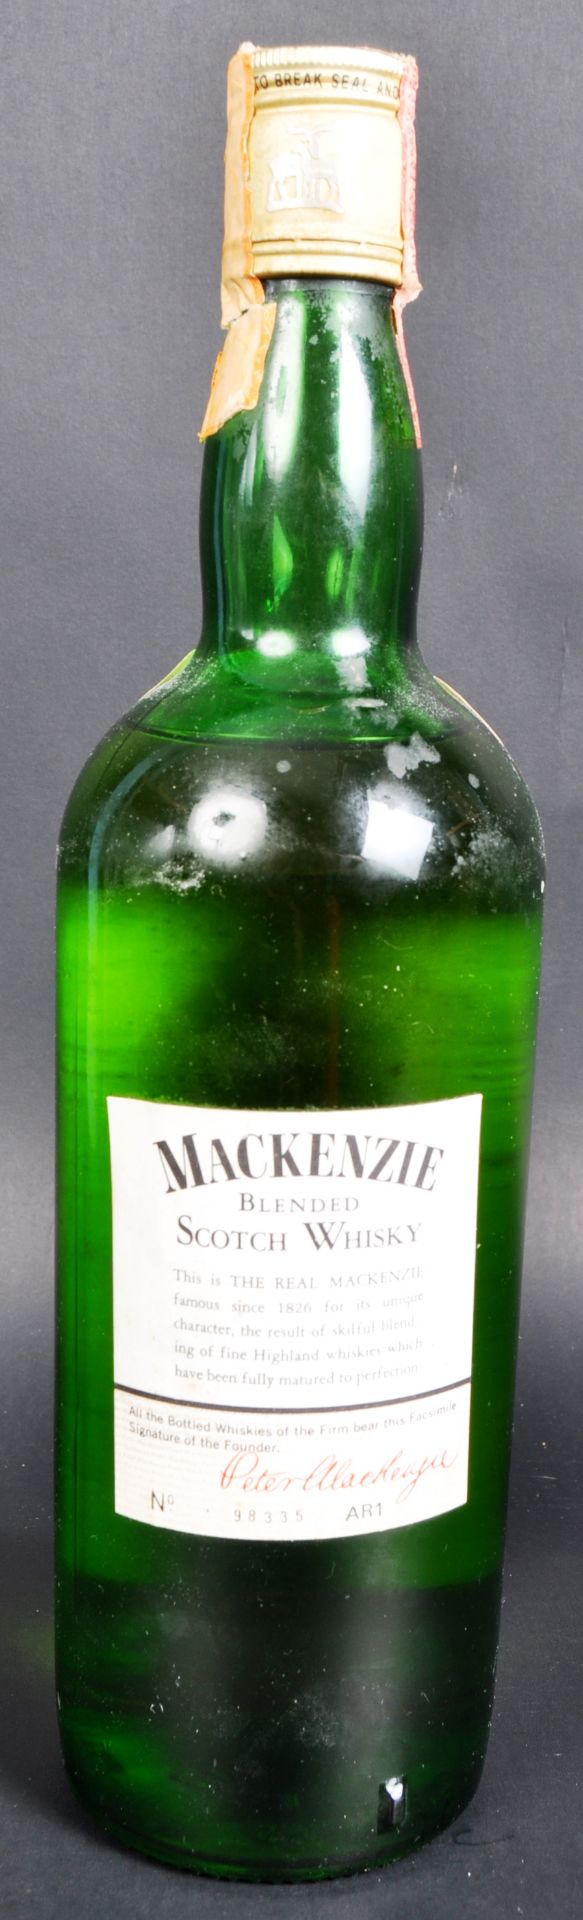 ONE 750ML BOTTLE OF THE REAL MACKENZIE SCOTCH WHISKY - Image 5 of 5